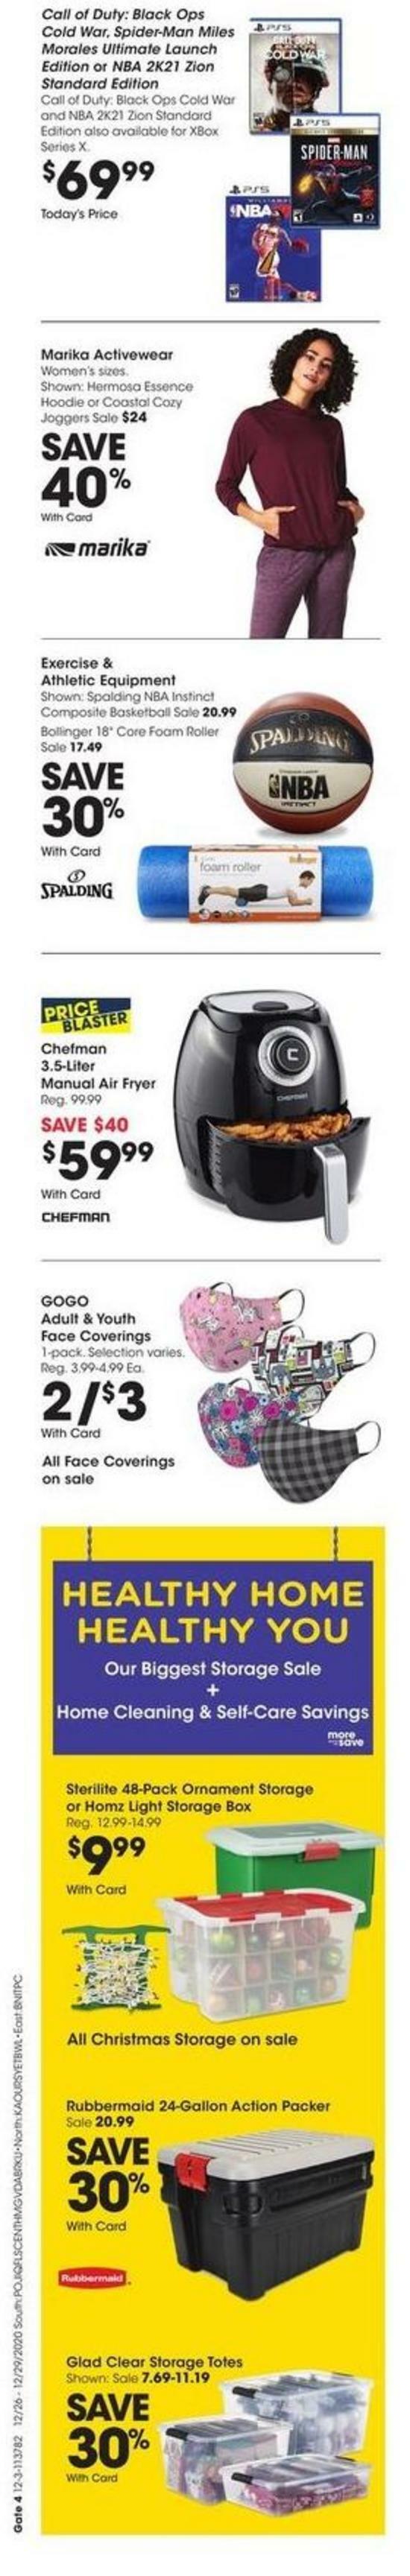 Fred Meyer Weekly Ad from December 26